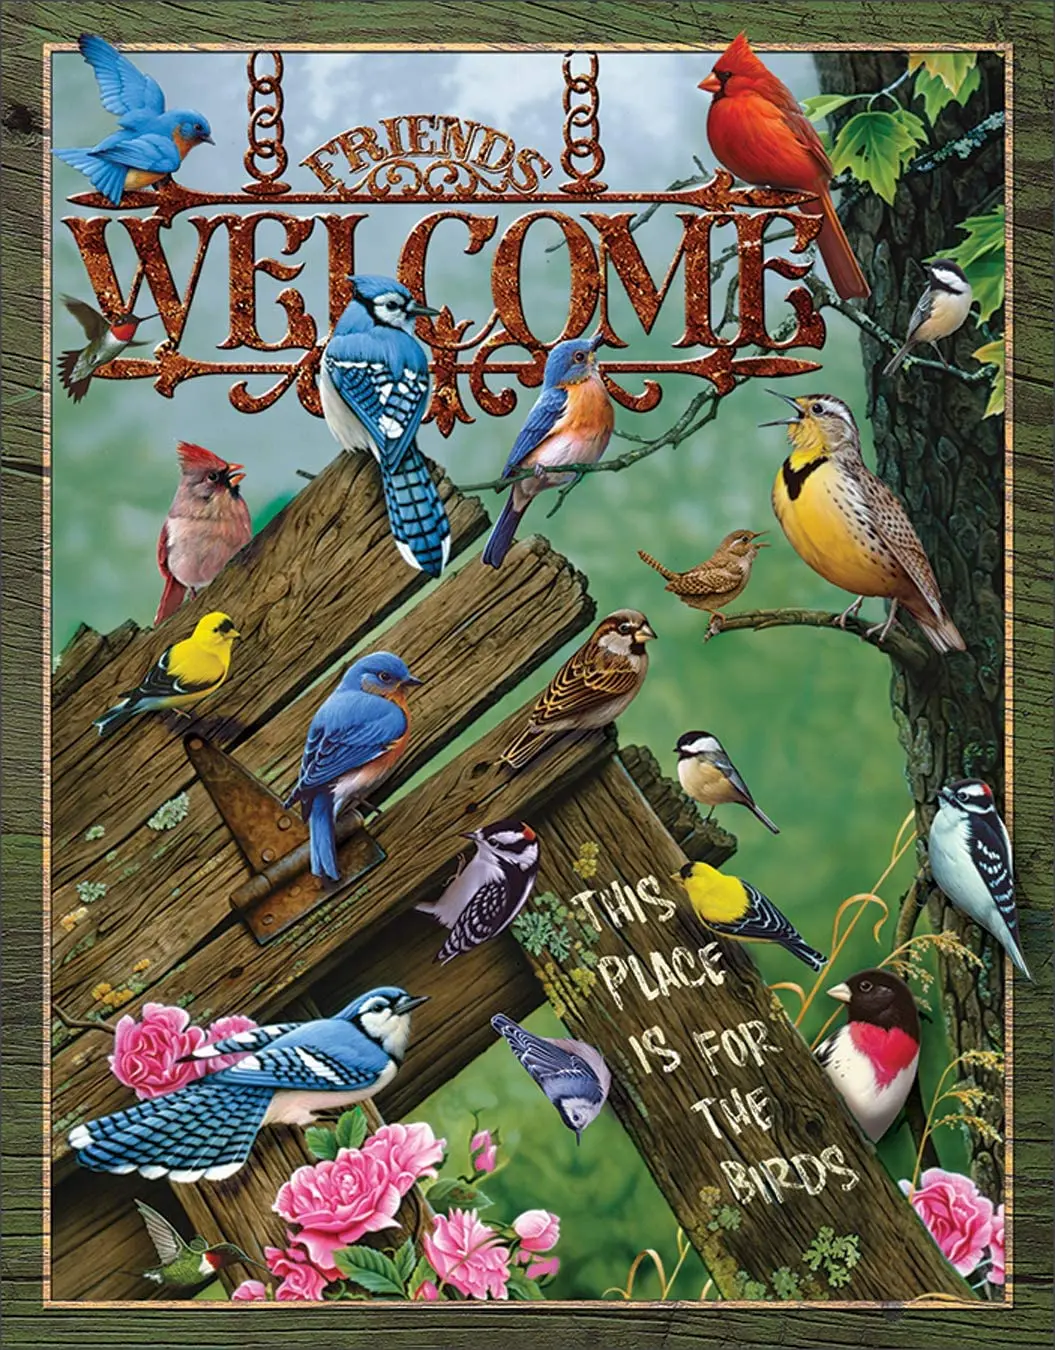 

Desperate Enterprises Welcome - This Place is for The Birds Tin Sign, 12.5" W x 16" H